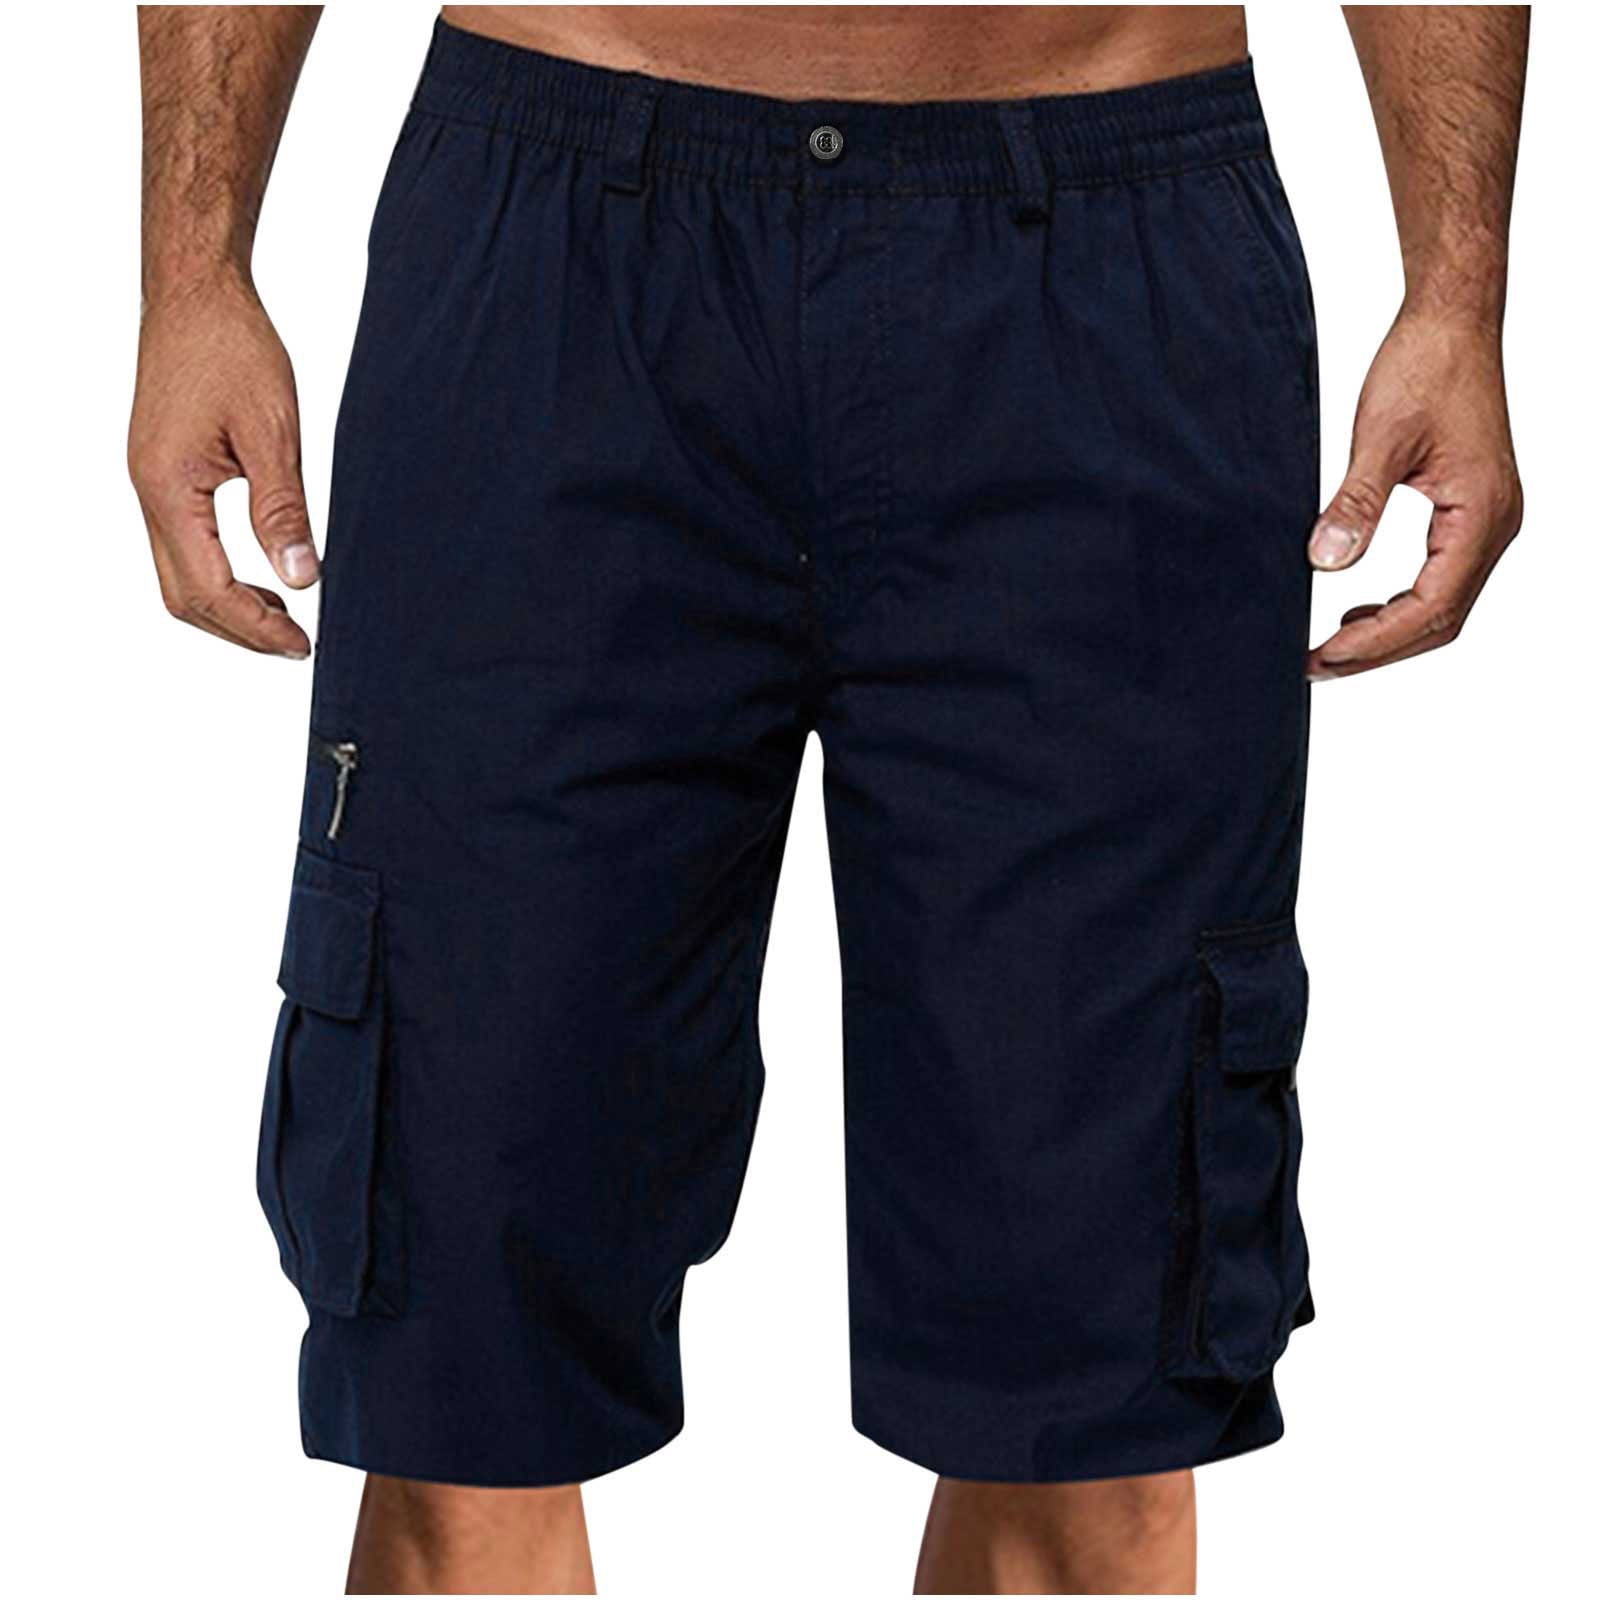 Summer Outdoor Training Physical Tactical Short Light Quick Dry Breathable Short 